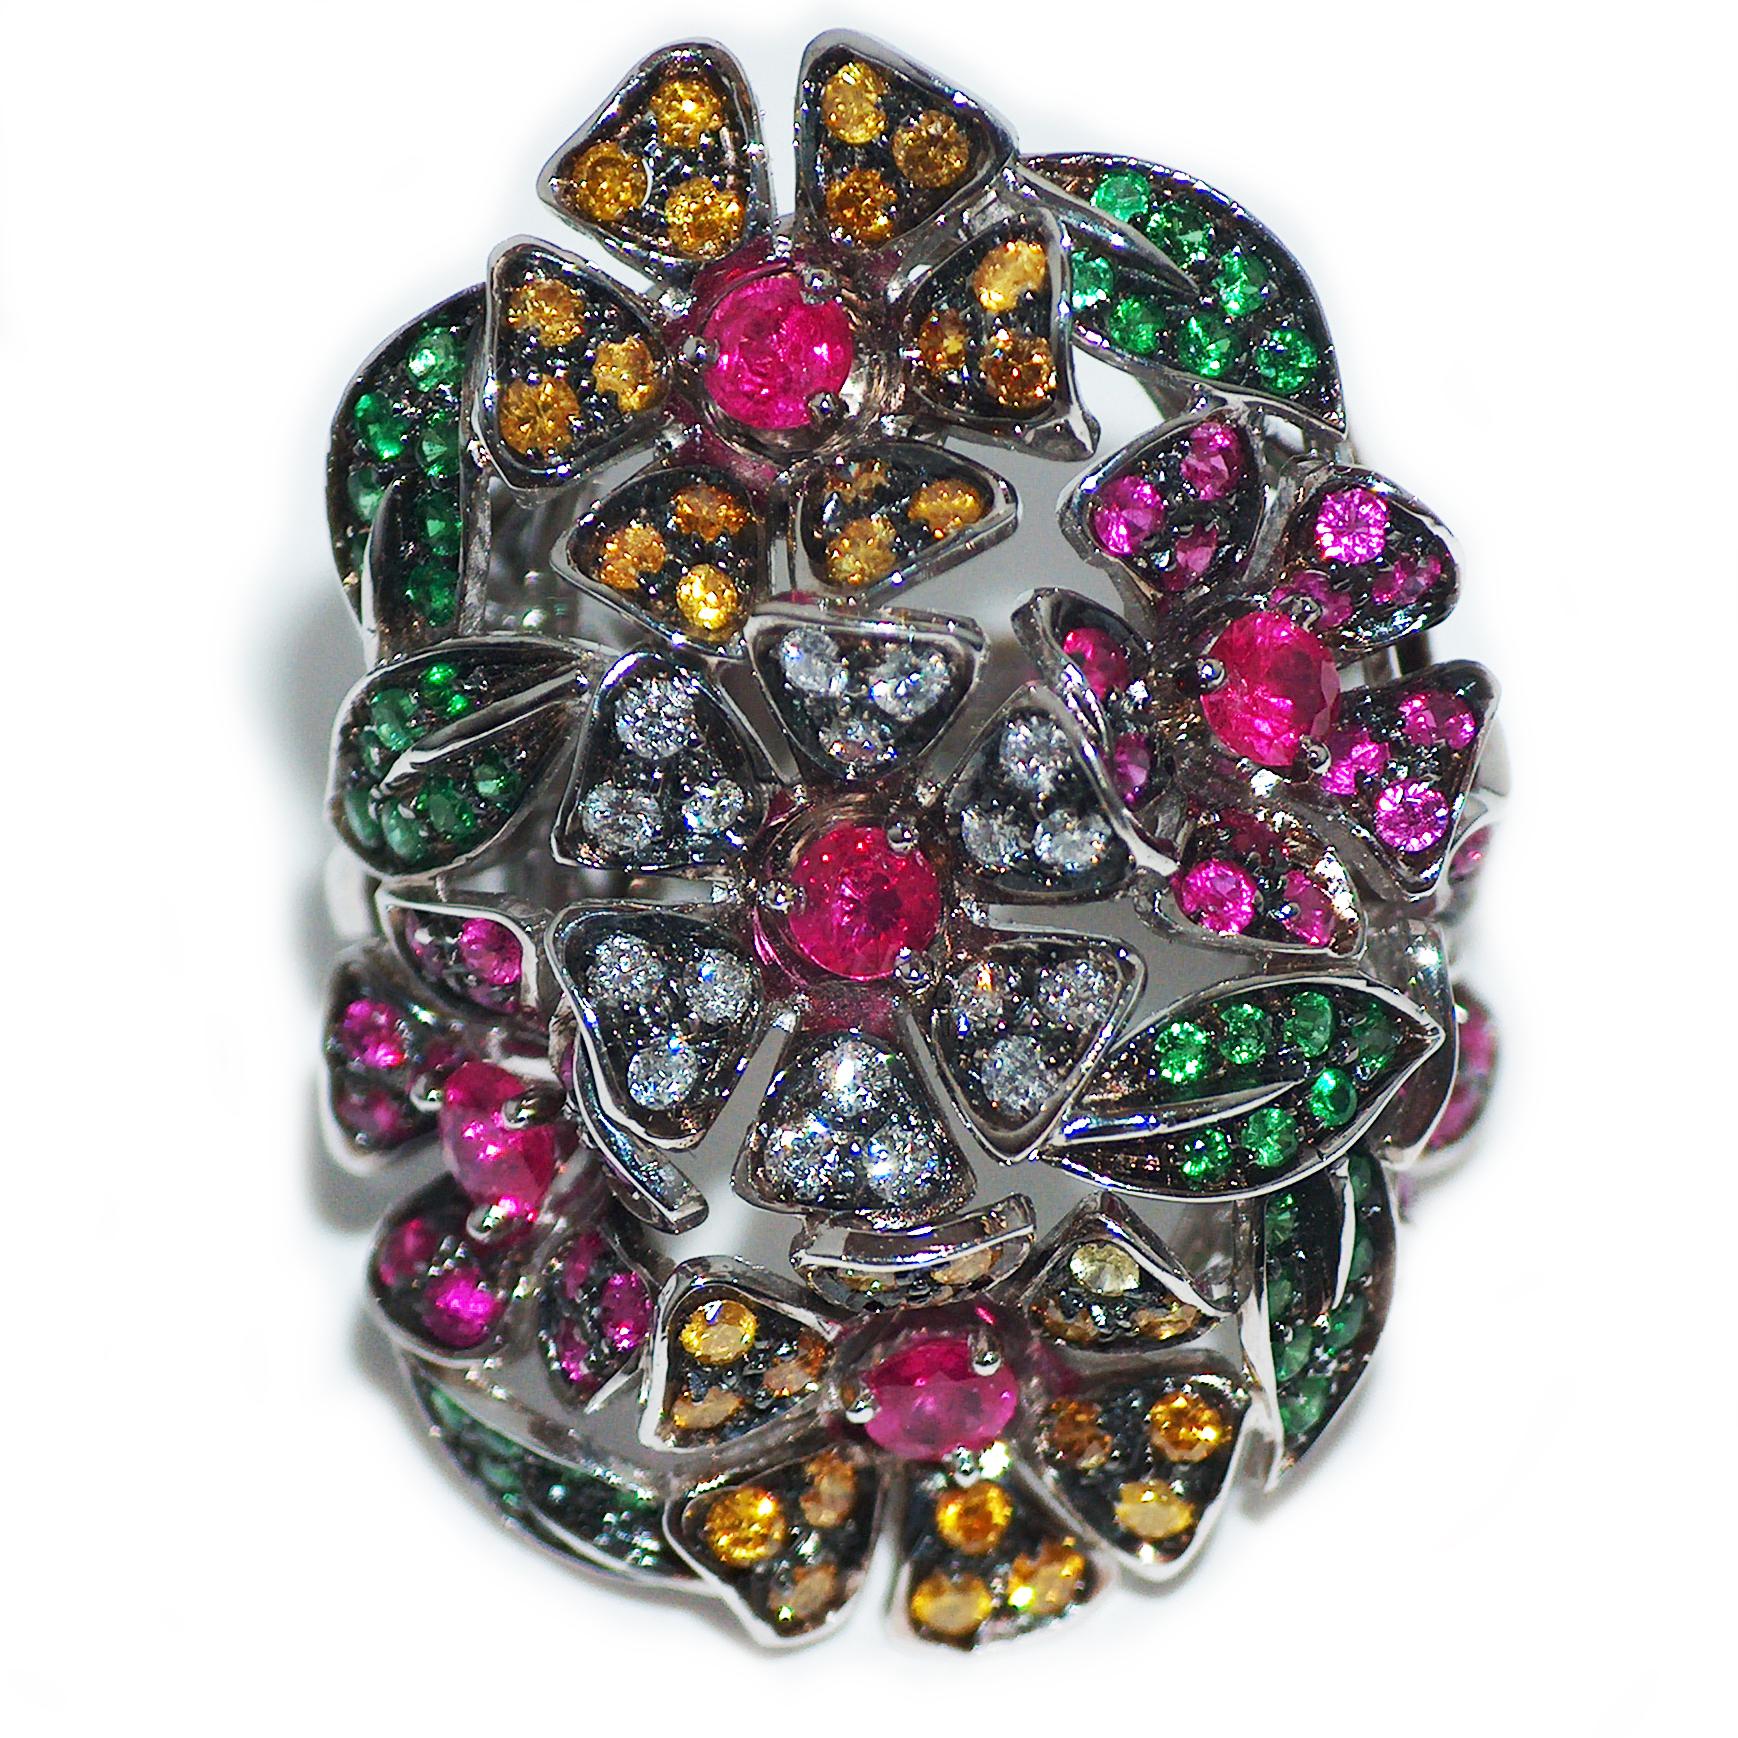 Ring in 18kt white gold which sets White Diamonds for ct. 0,62, Yellow Diamonds for ct. 0,66, Rubies and Sapphires for ct. 1,16 and Tsavorites for ct. 0,82. 

Unique piece, designed and handcrafted in Italy, by visionary goldsmith Paolo Piovan.